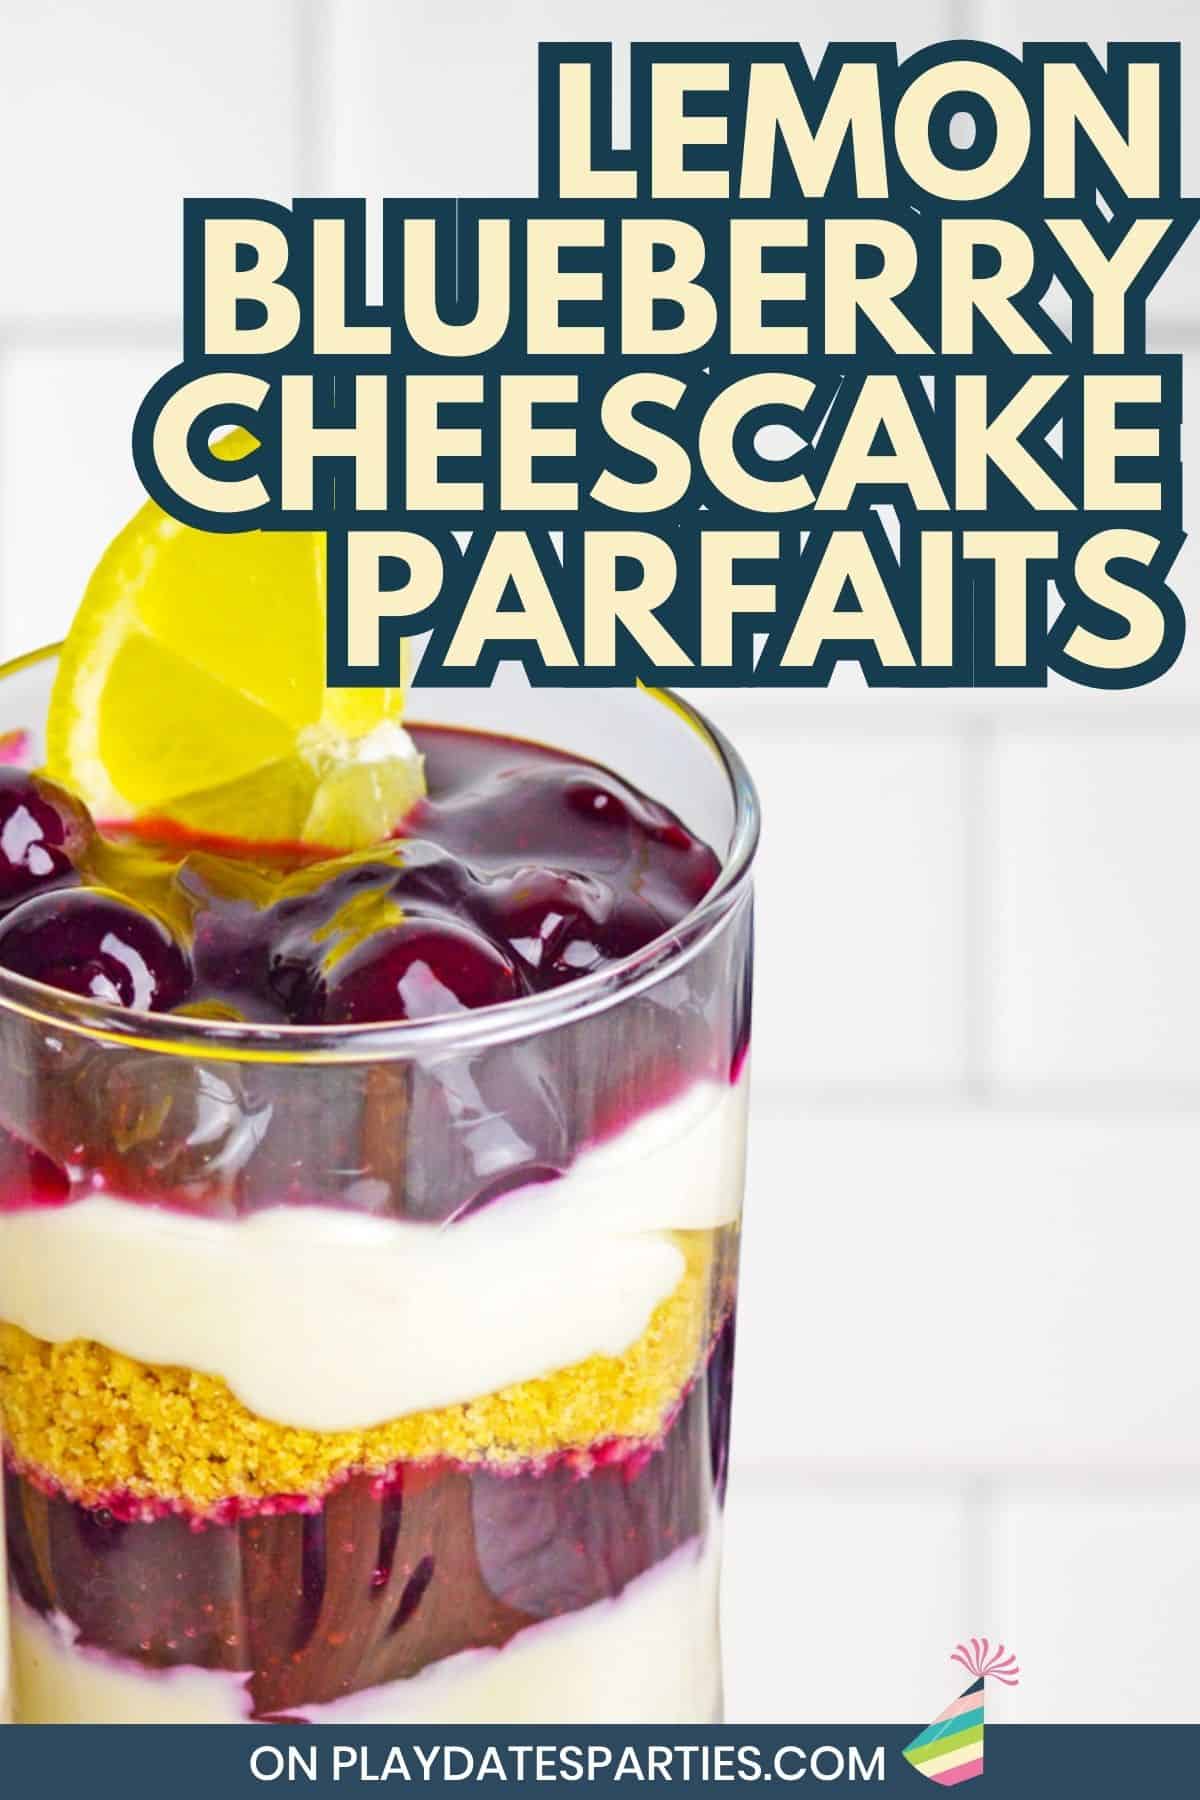 A parfait made with layers of blueberry, cheesecake, and graham crackers.